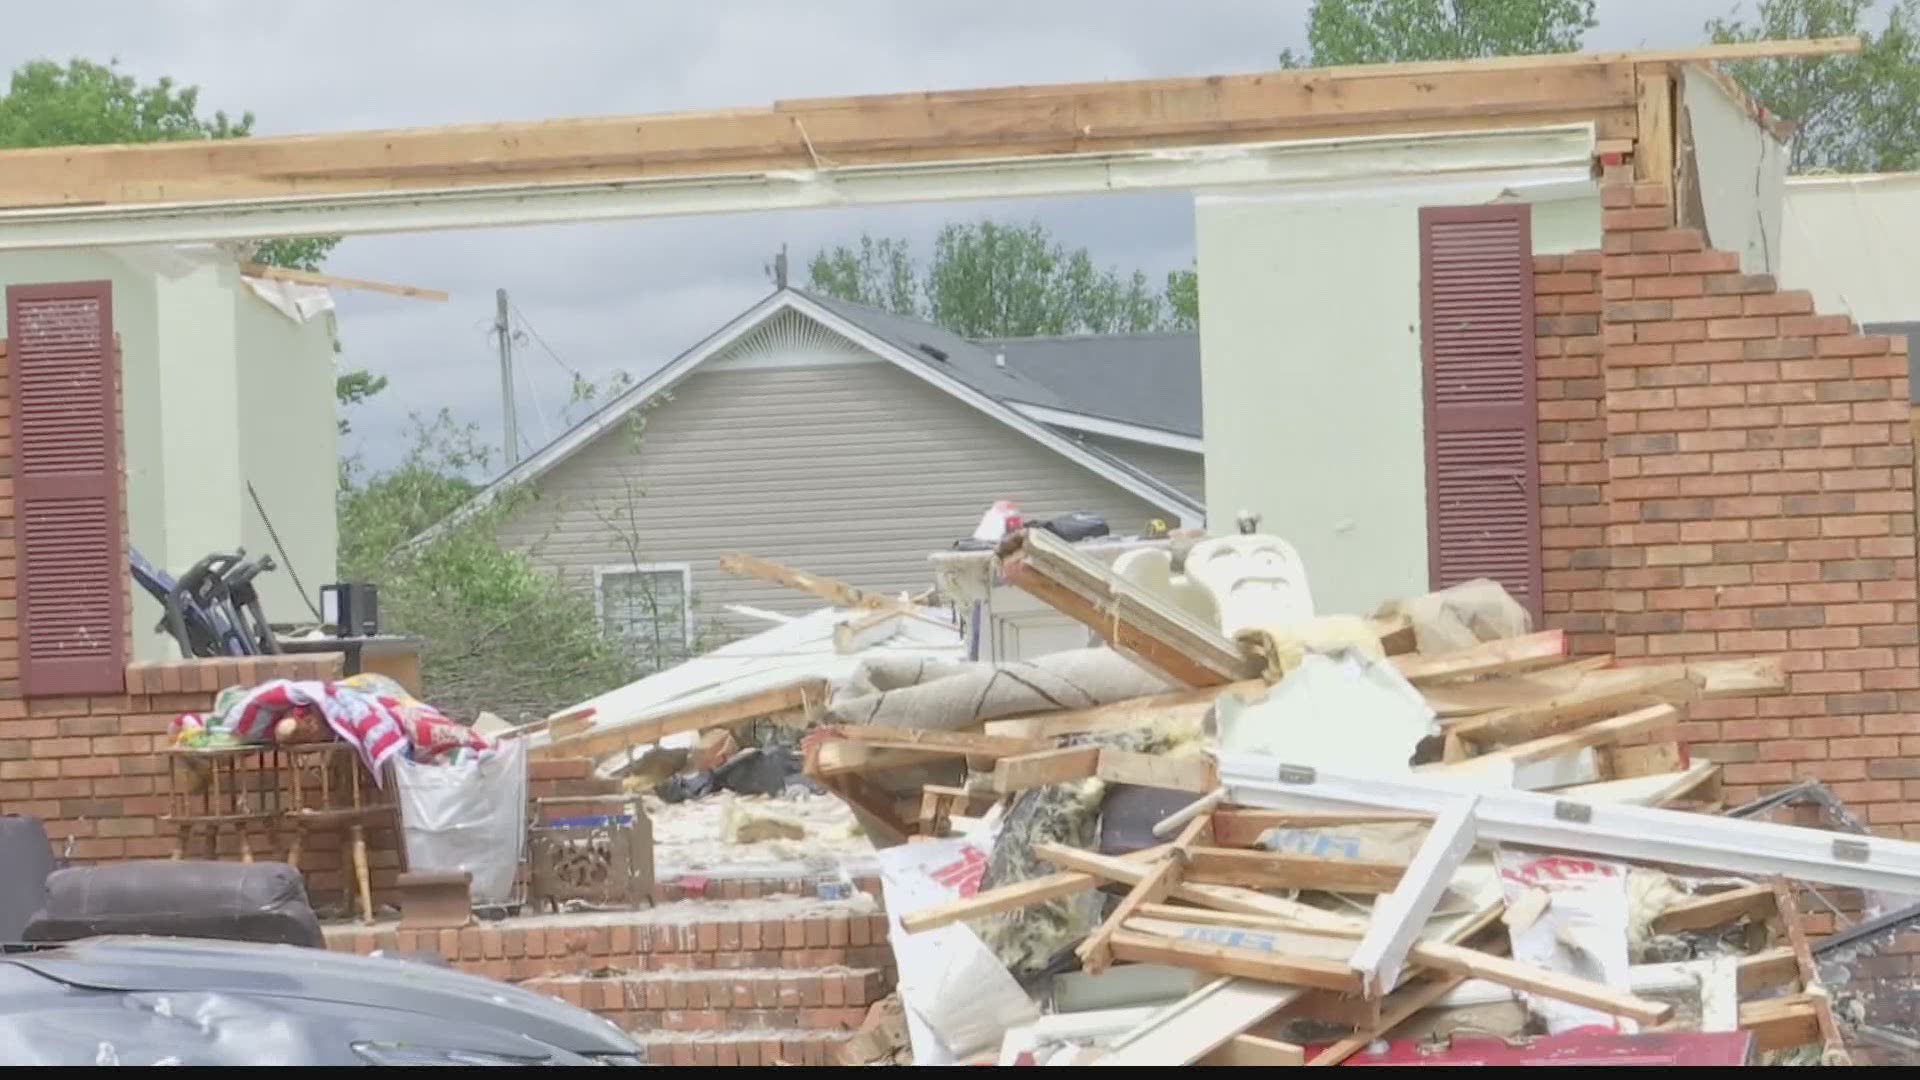 Trees and power lines are down, cars are totaled, and some homes are completely destroyed after an EF-2 tornado ripped through Boaz.